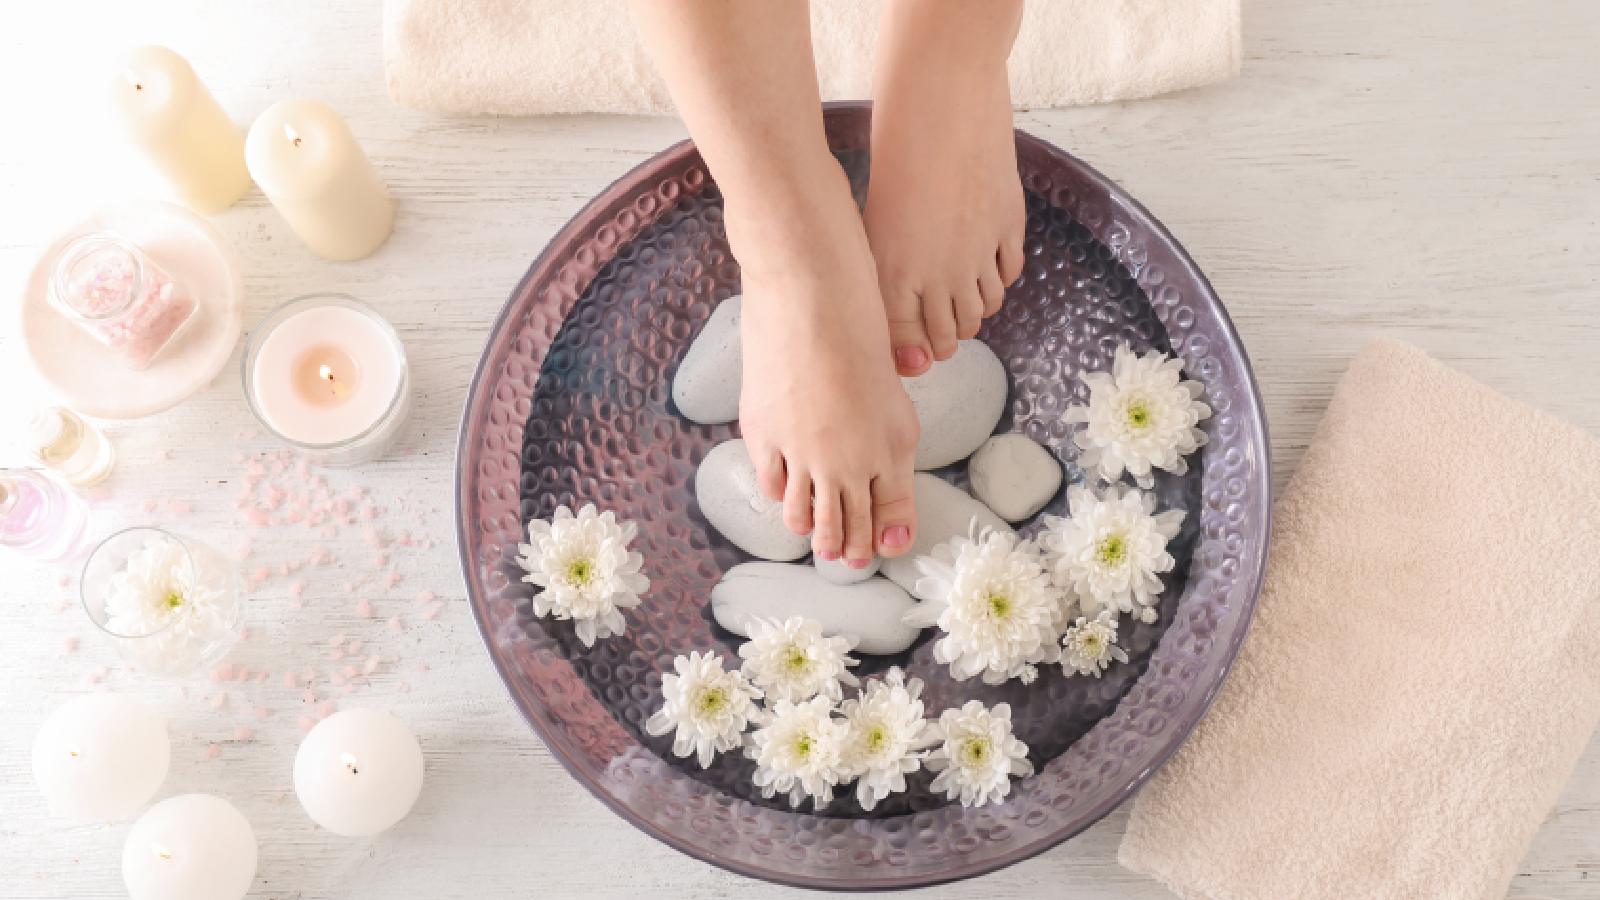 Must-have foot spa essentials to pamper yourself at home